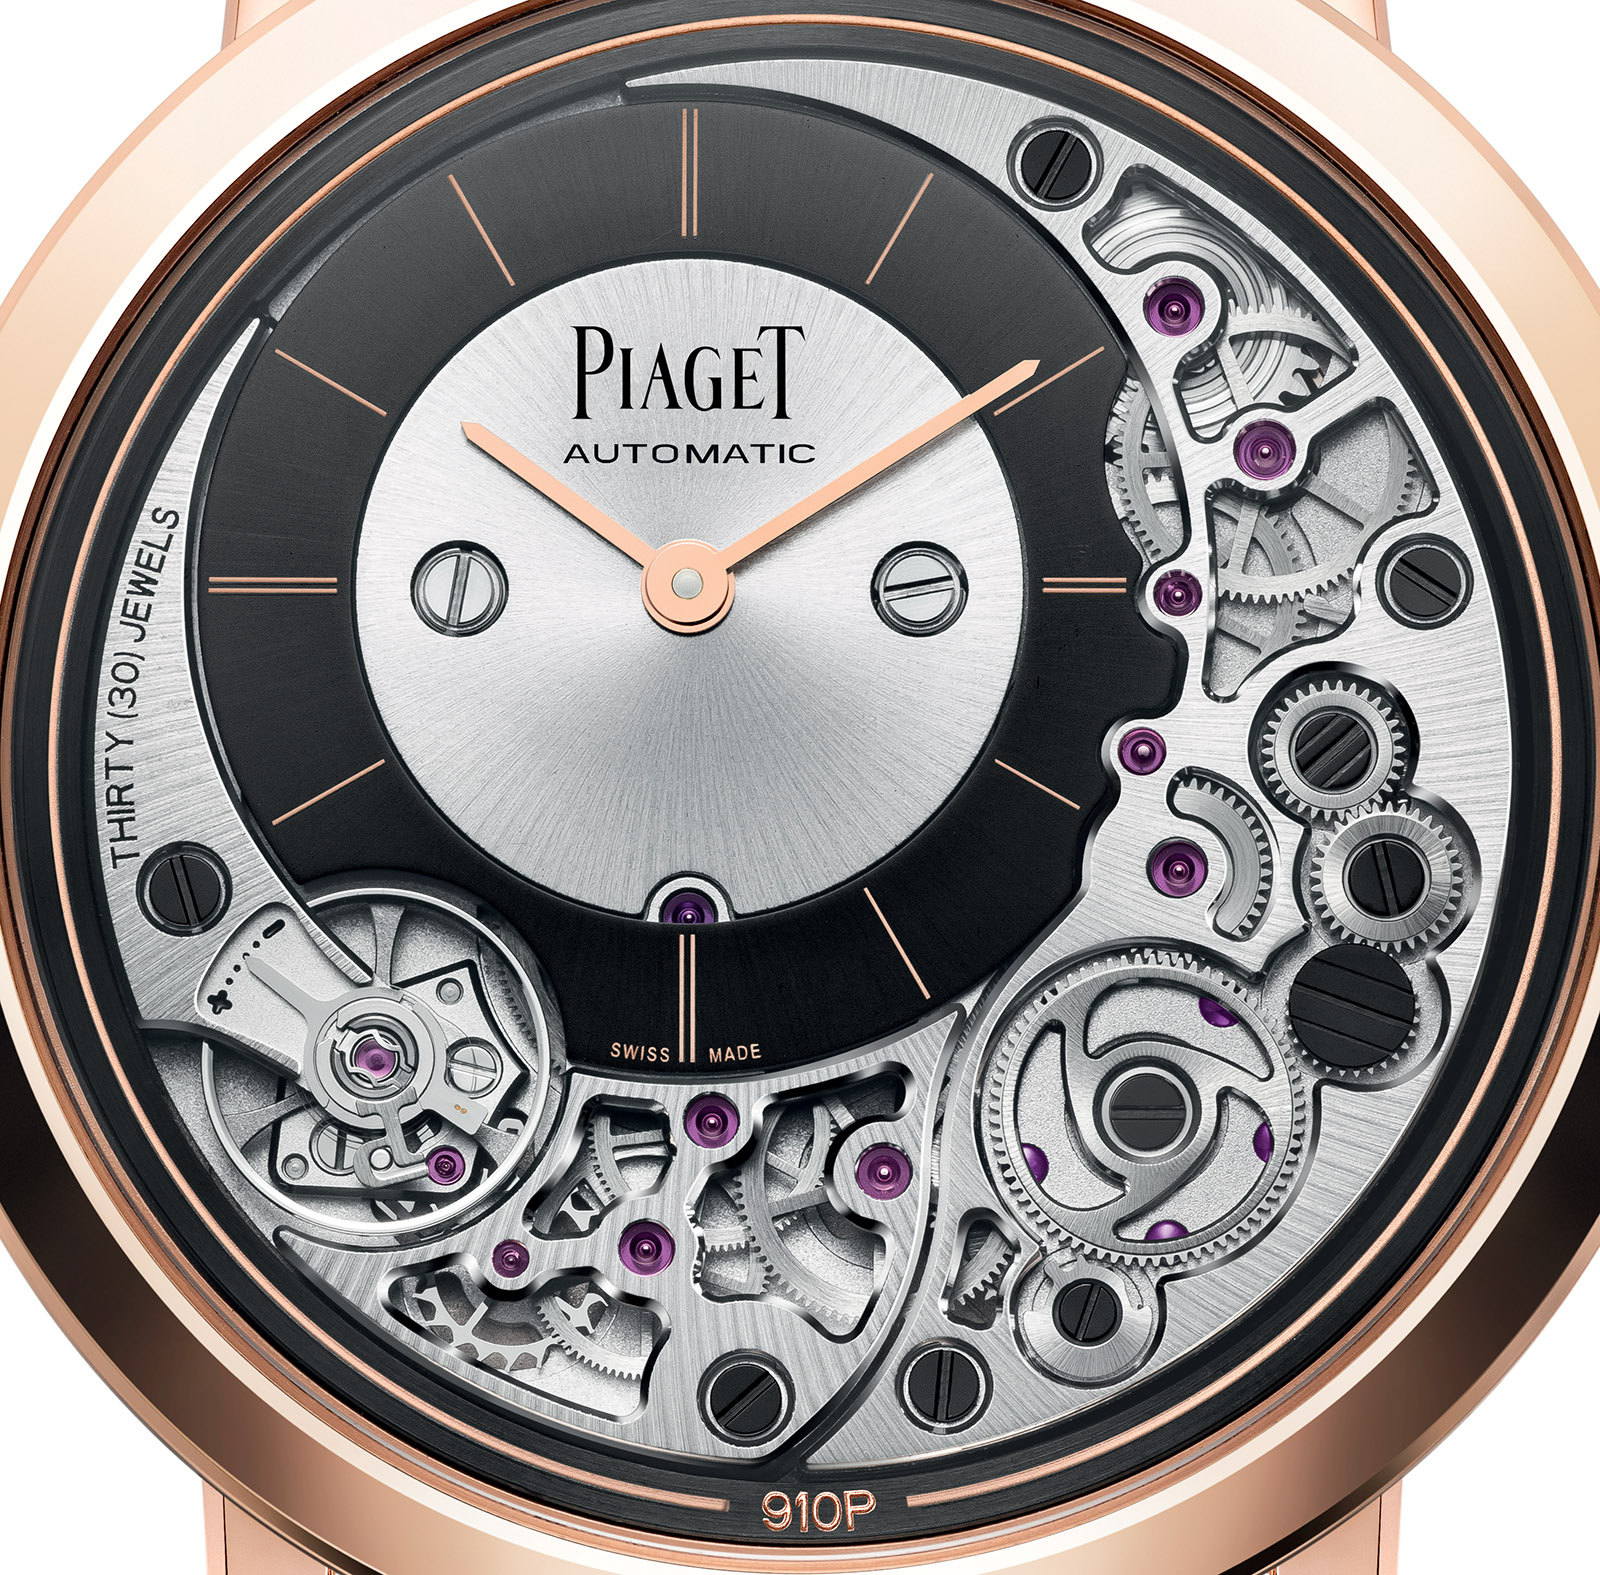 Piaget Altiplano Ultimate Automatic 910P 4